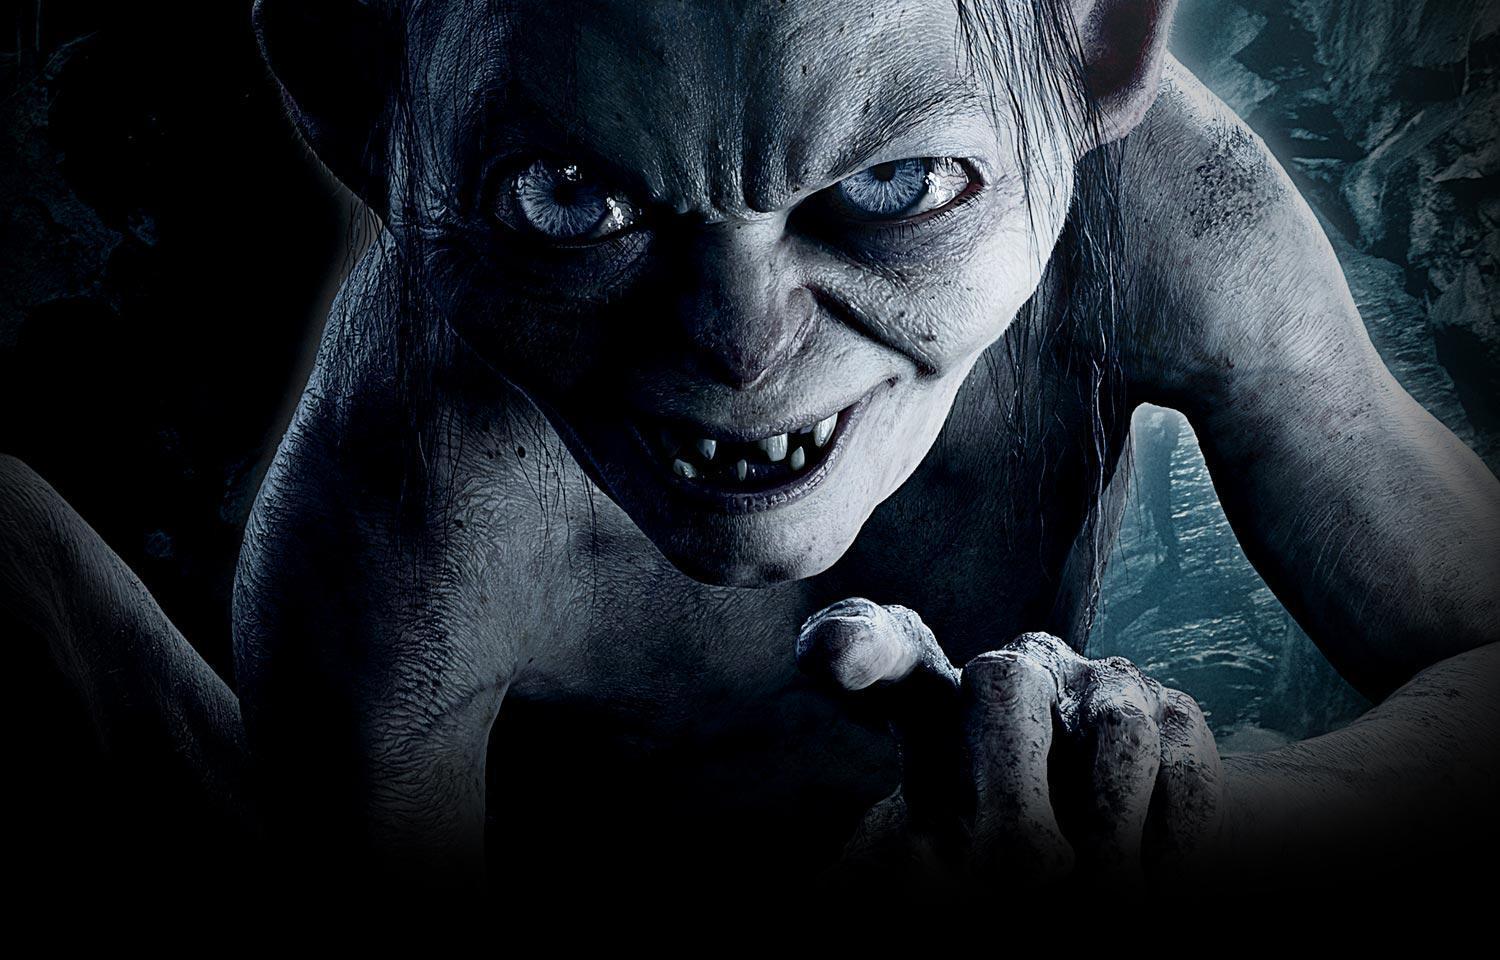 Image For Smeagol Actor Name.